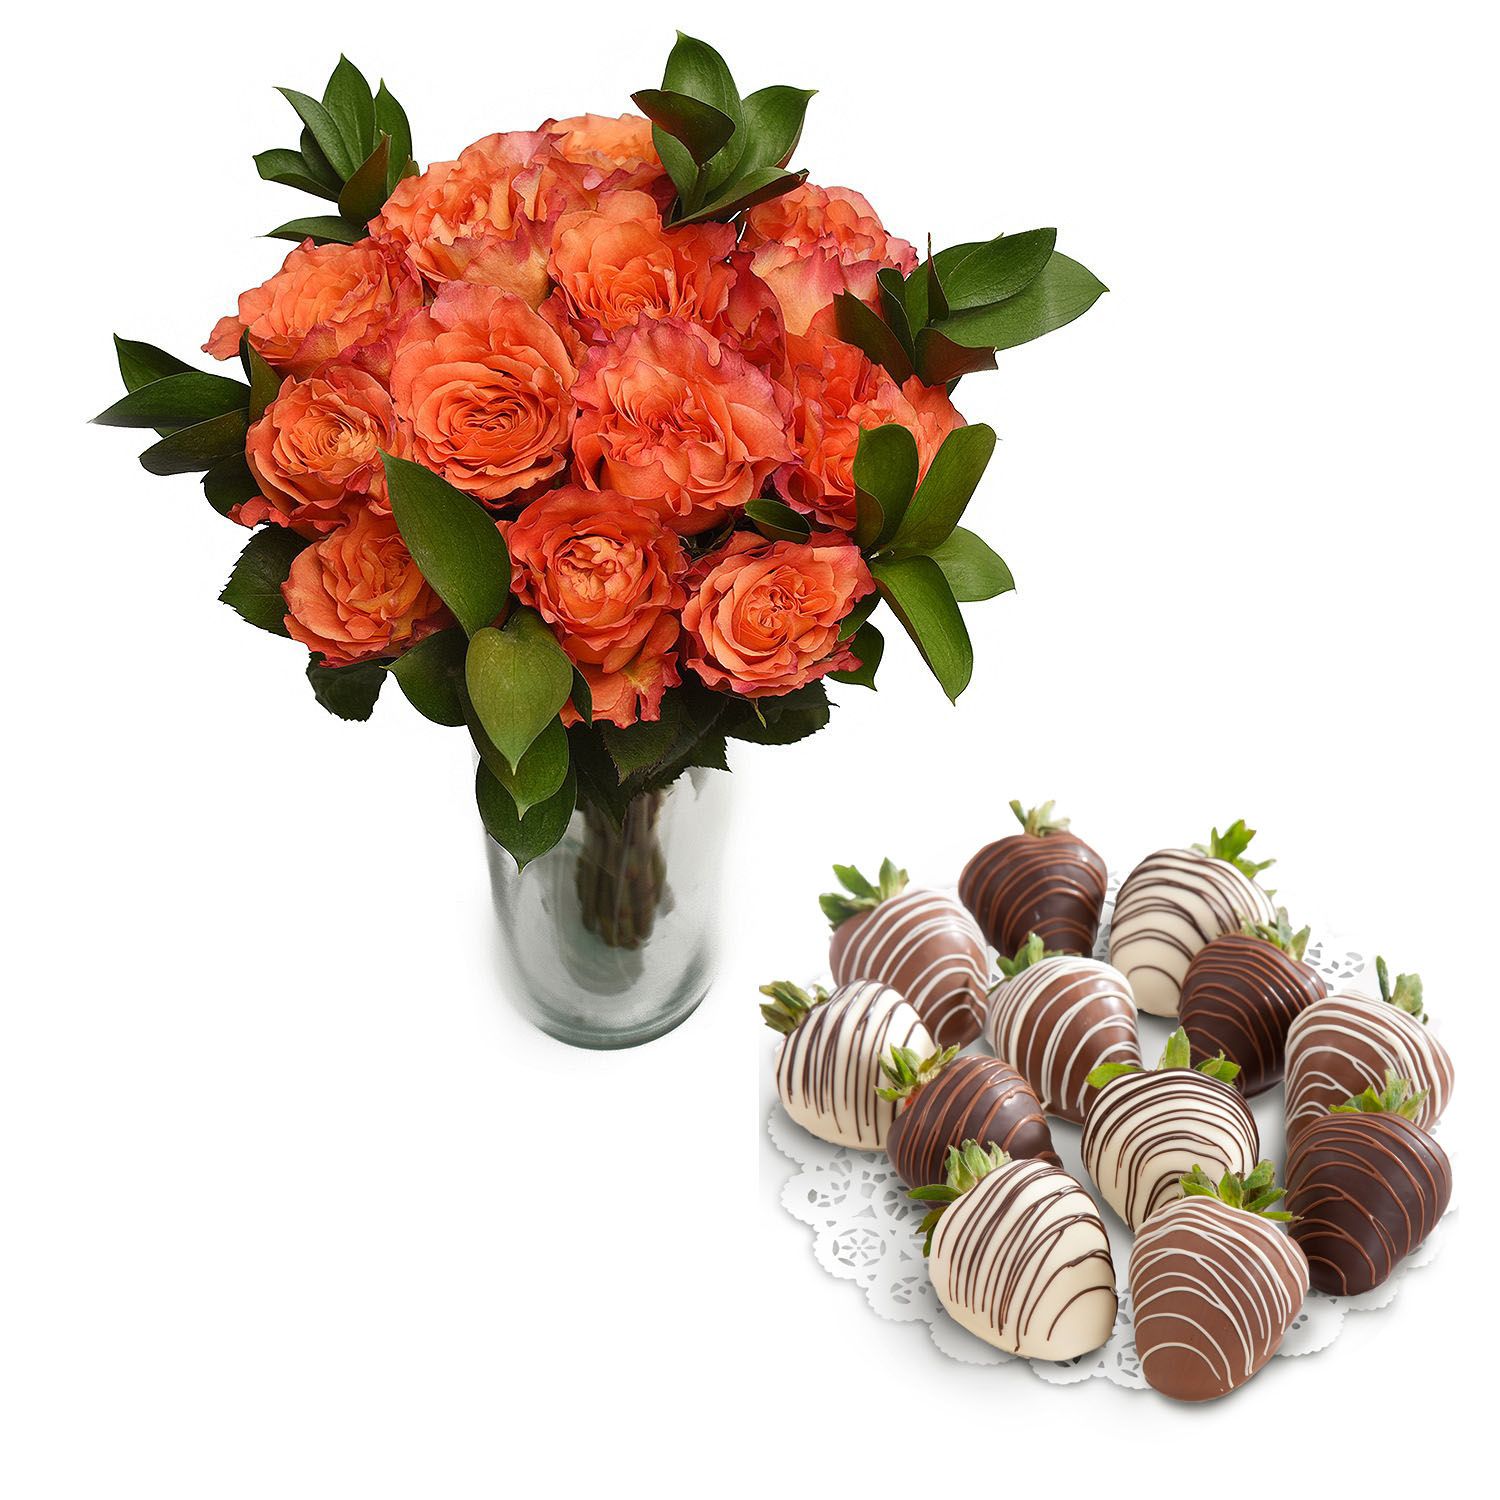 Blooms & Berries 1 Dozen Roses Valentine’s Day Special with Vase + Assorted Chocolate Covered Strawberries (12-count)